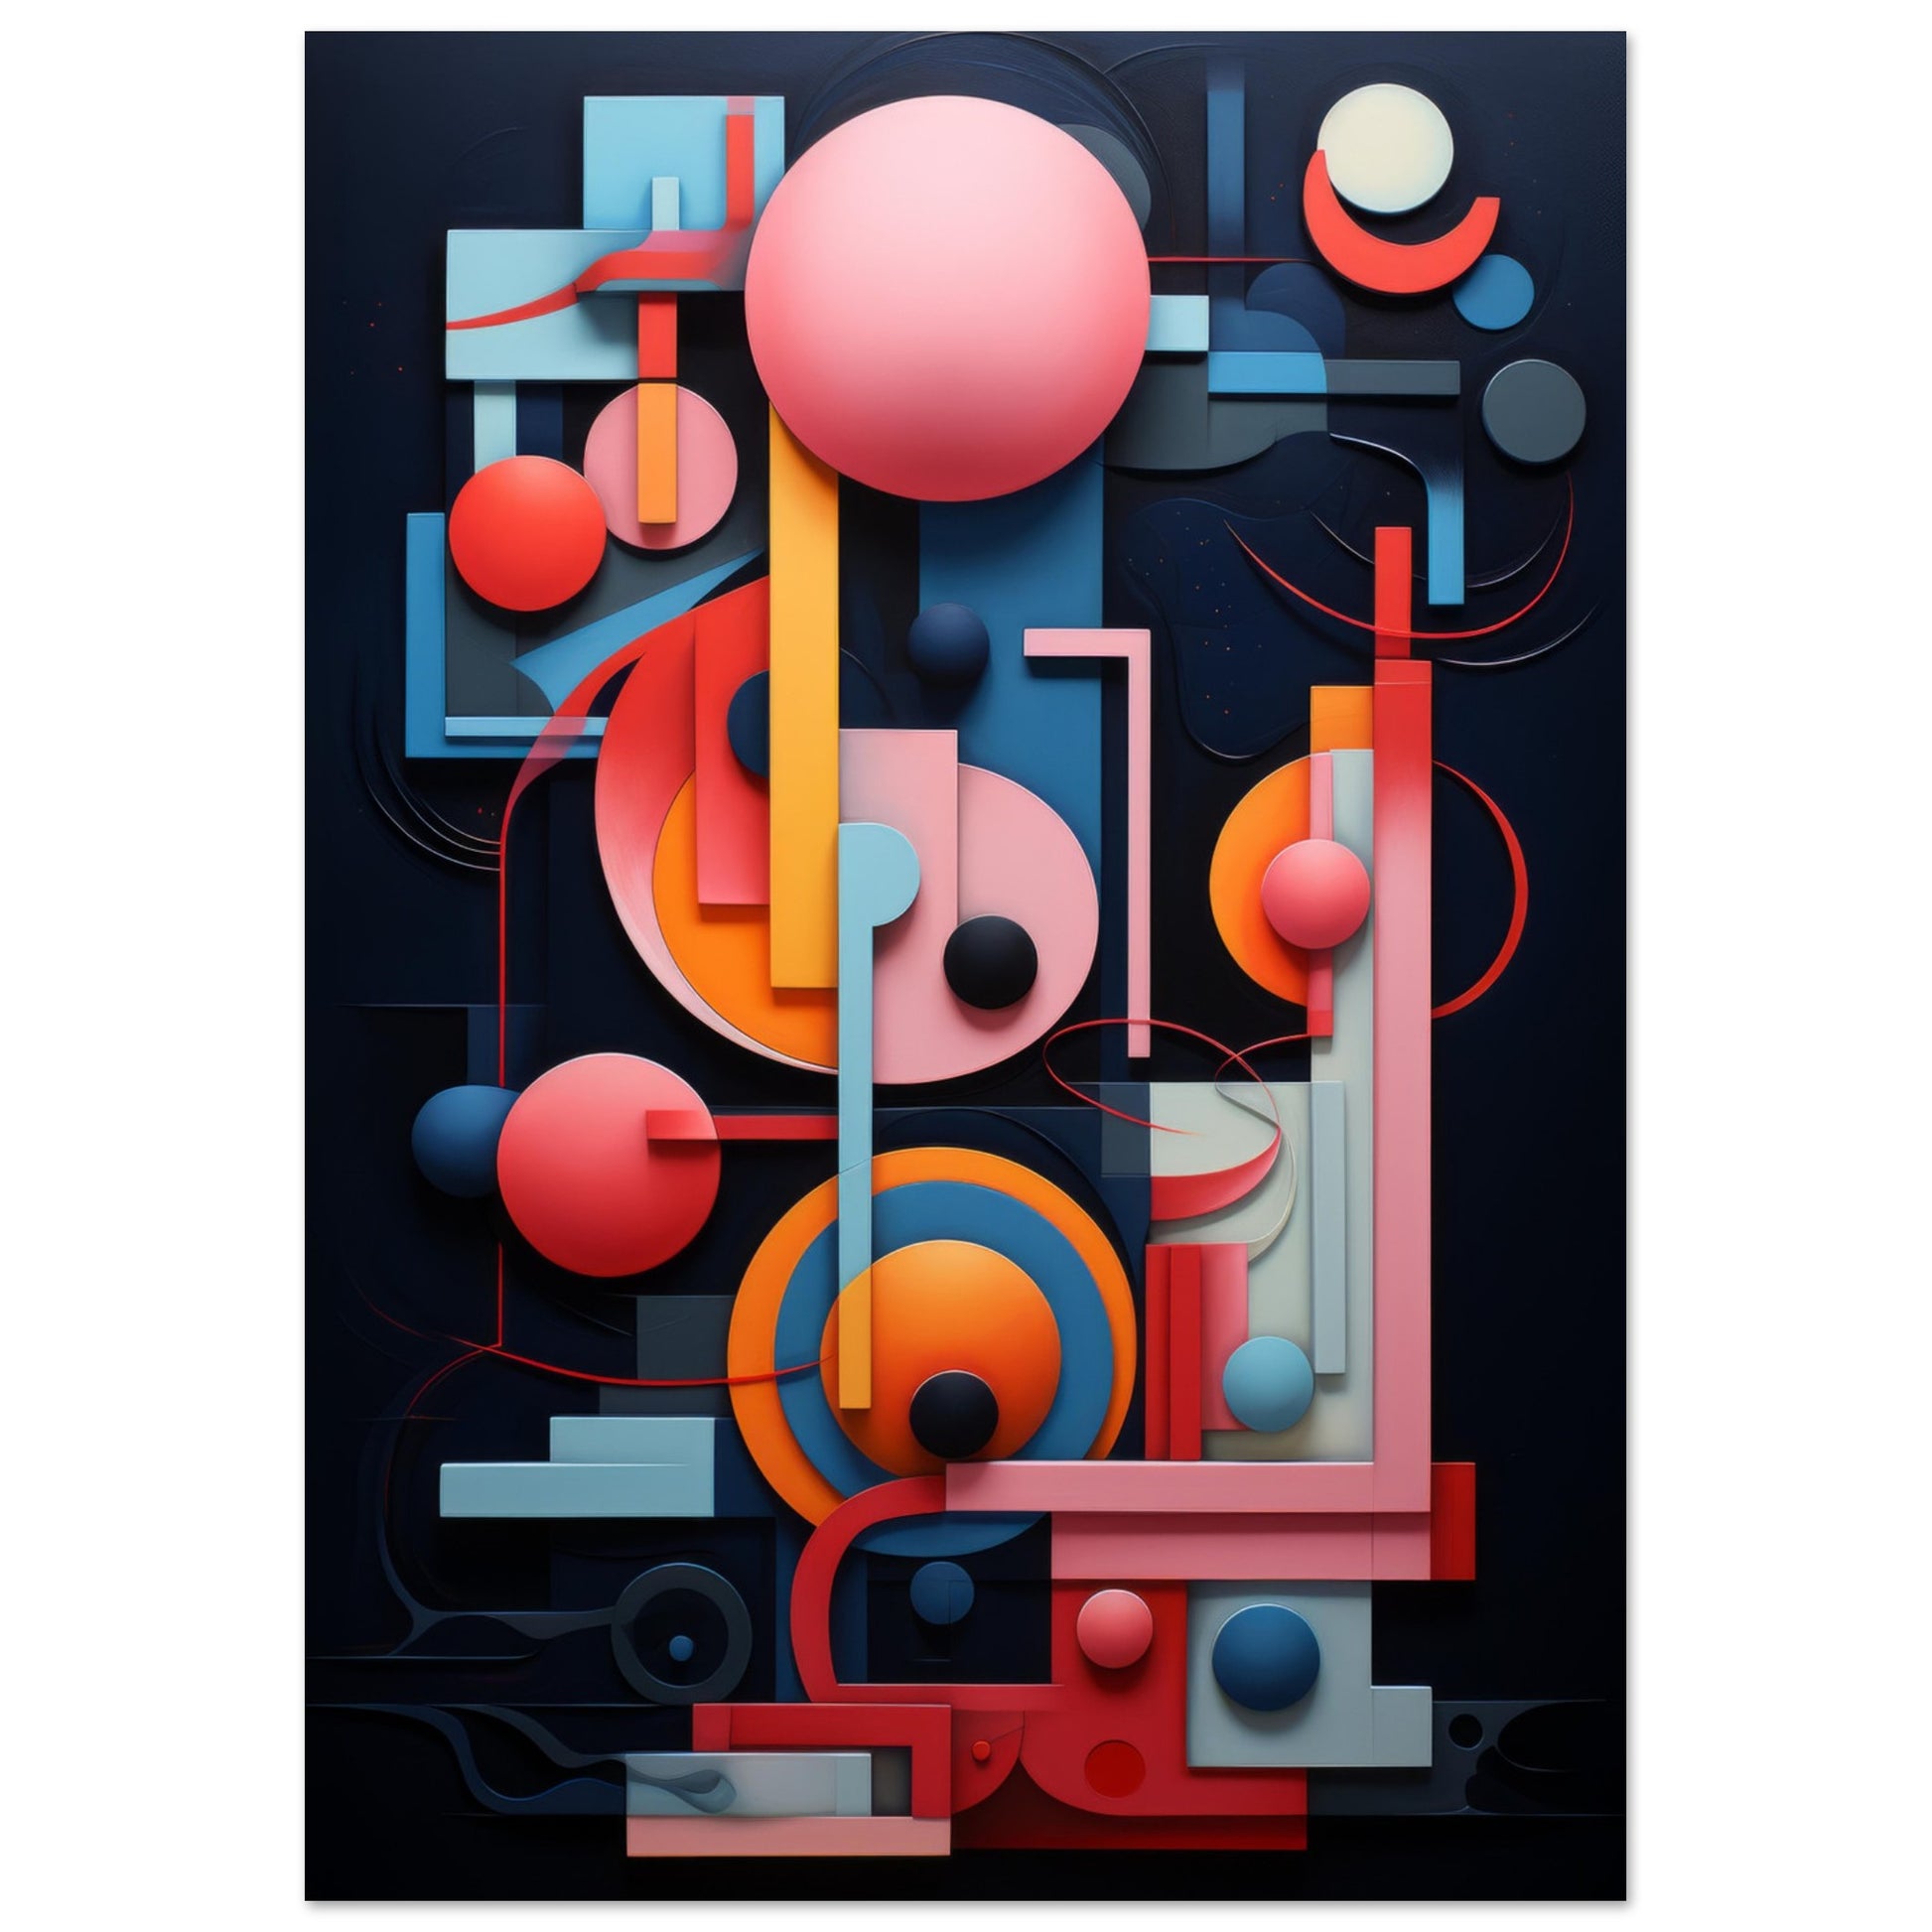 A contemporary 3D art piece titled "Candymanics," showcasing a plethora of vibrant geometric shapes intermingling against a dark backdrop. The composition is intricate, with spheres, rectangles, and lines coming together in a harmonious dance of color and form, embodying both complexity and whimsy.